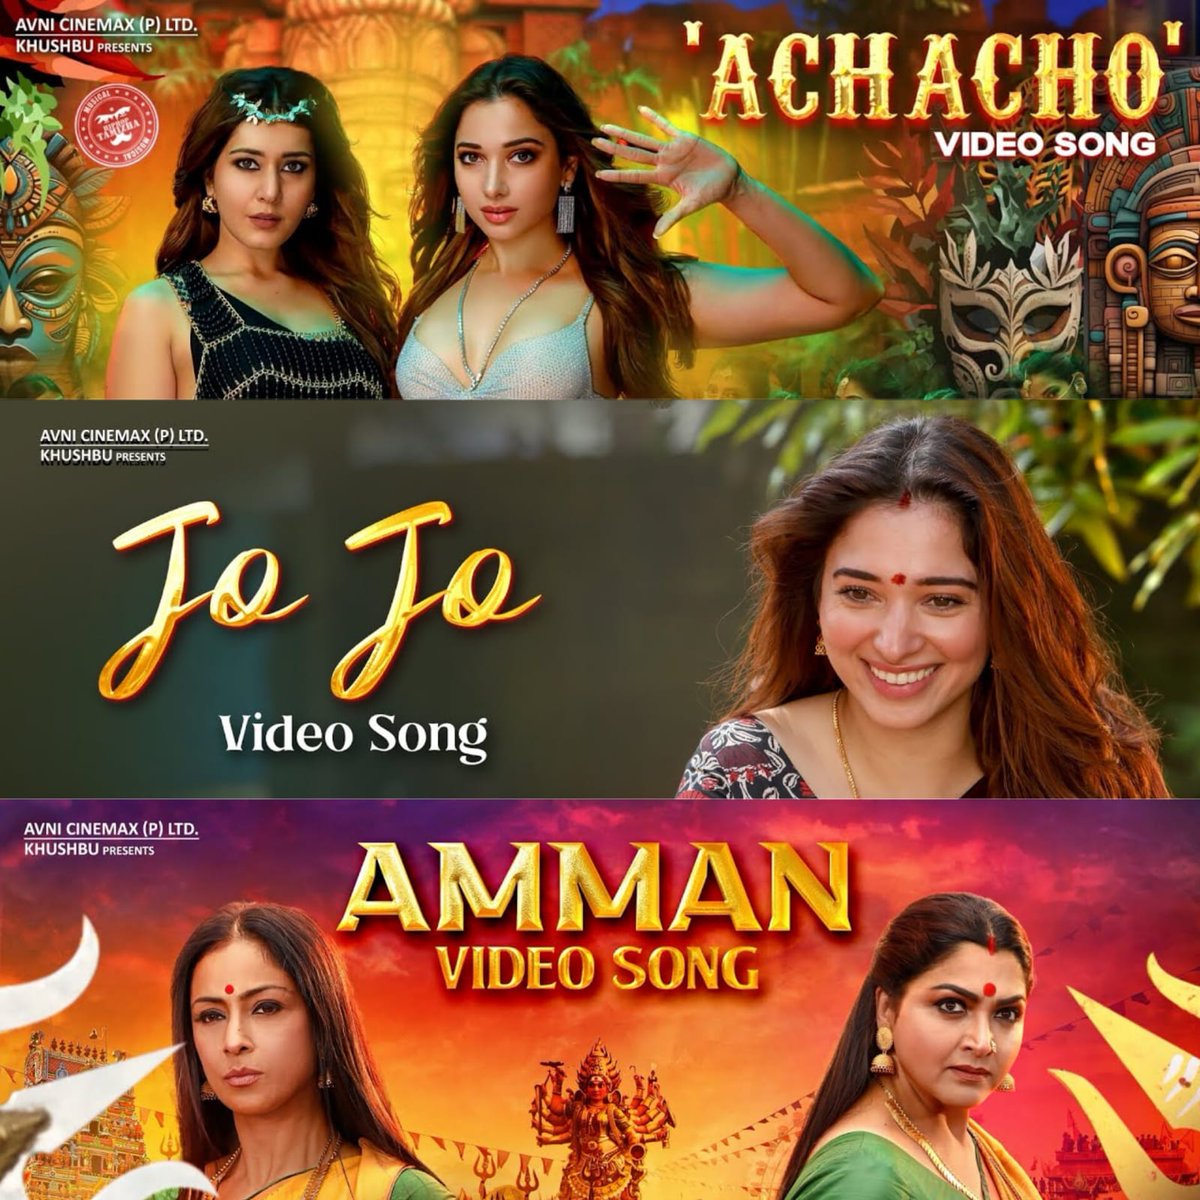 #Aranmanai4 continues to draw in families during the weekdays, maintaining its strong performance. The popularity of #Achacho #JoJo #Amman songs on YouTube reflects its genuine appeal among viewers. It's a success worth acknowledging! 🎉